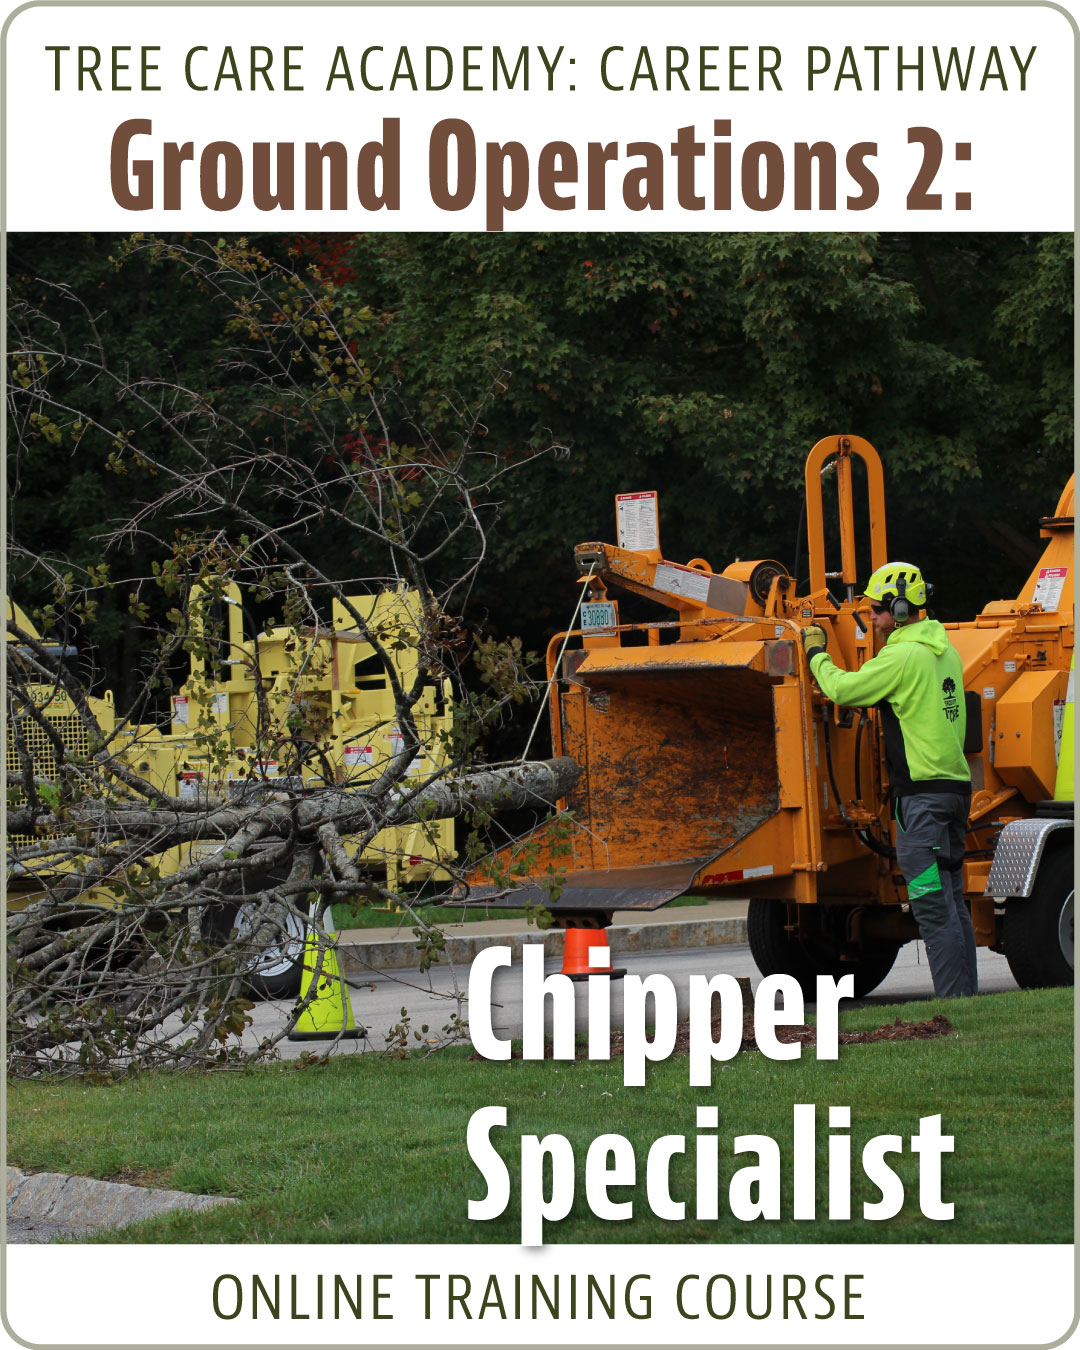 Ground Operations 2: Chipper Specialist